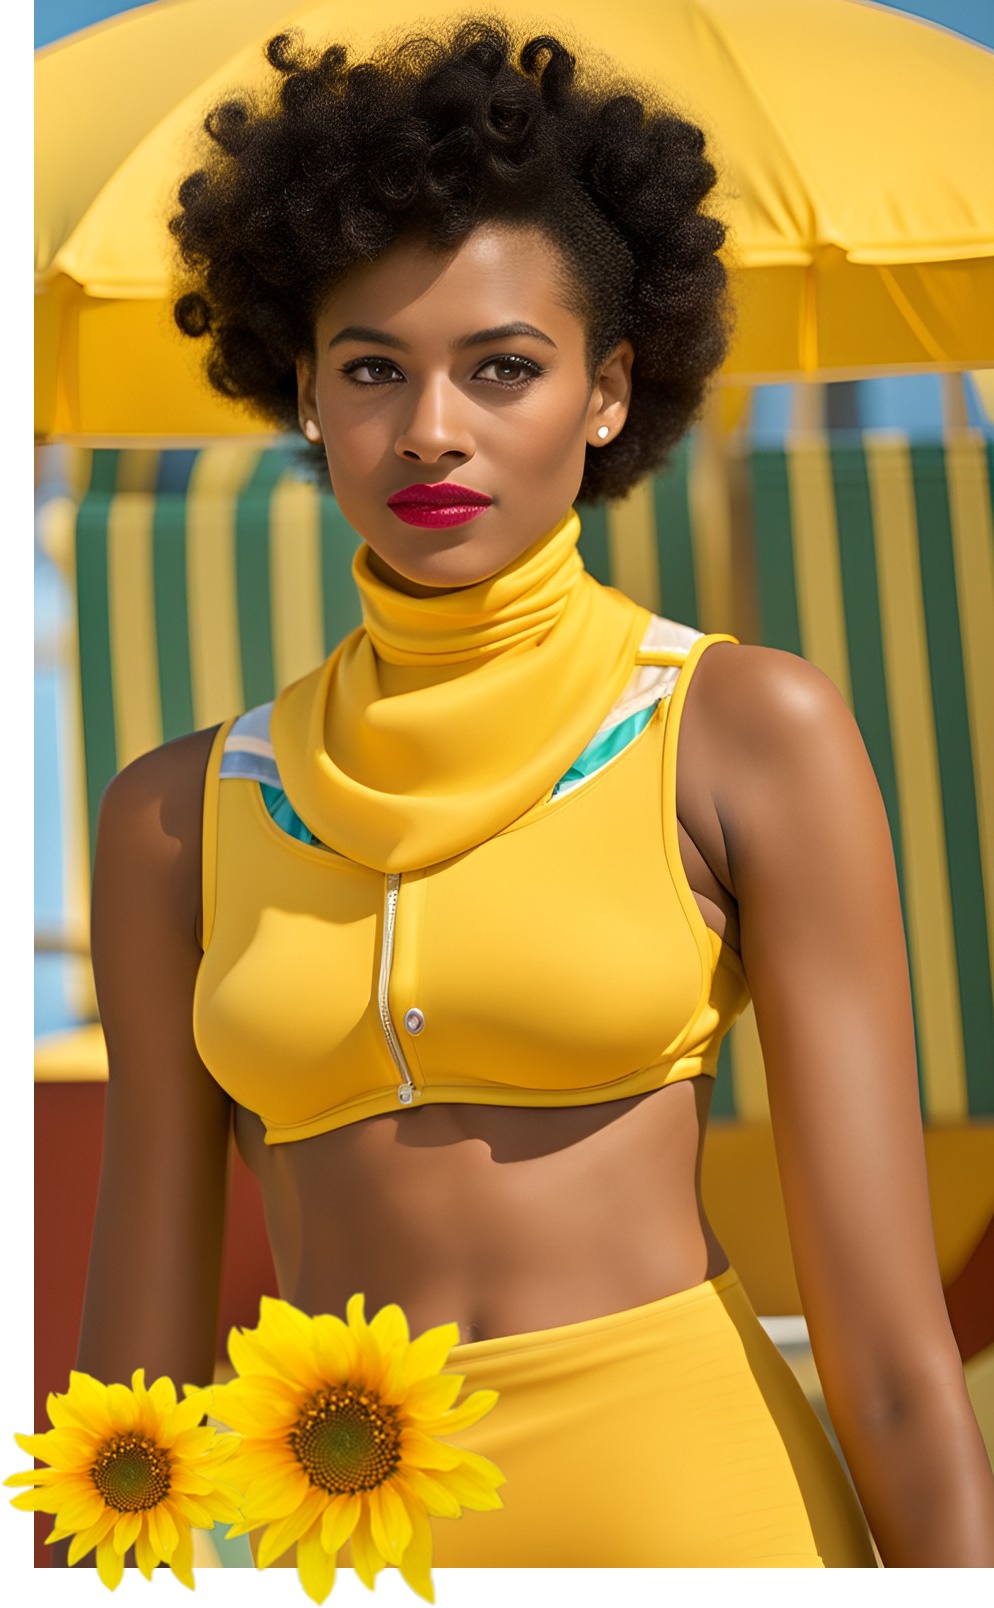 Mixed-race models pose in yellow sports outfit Dream138